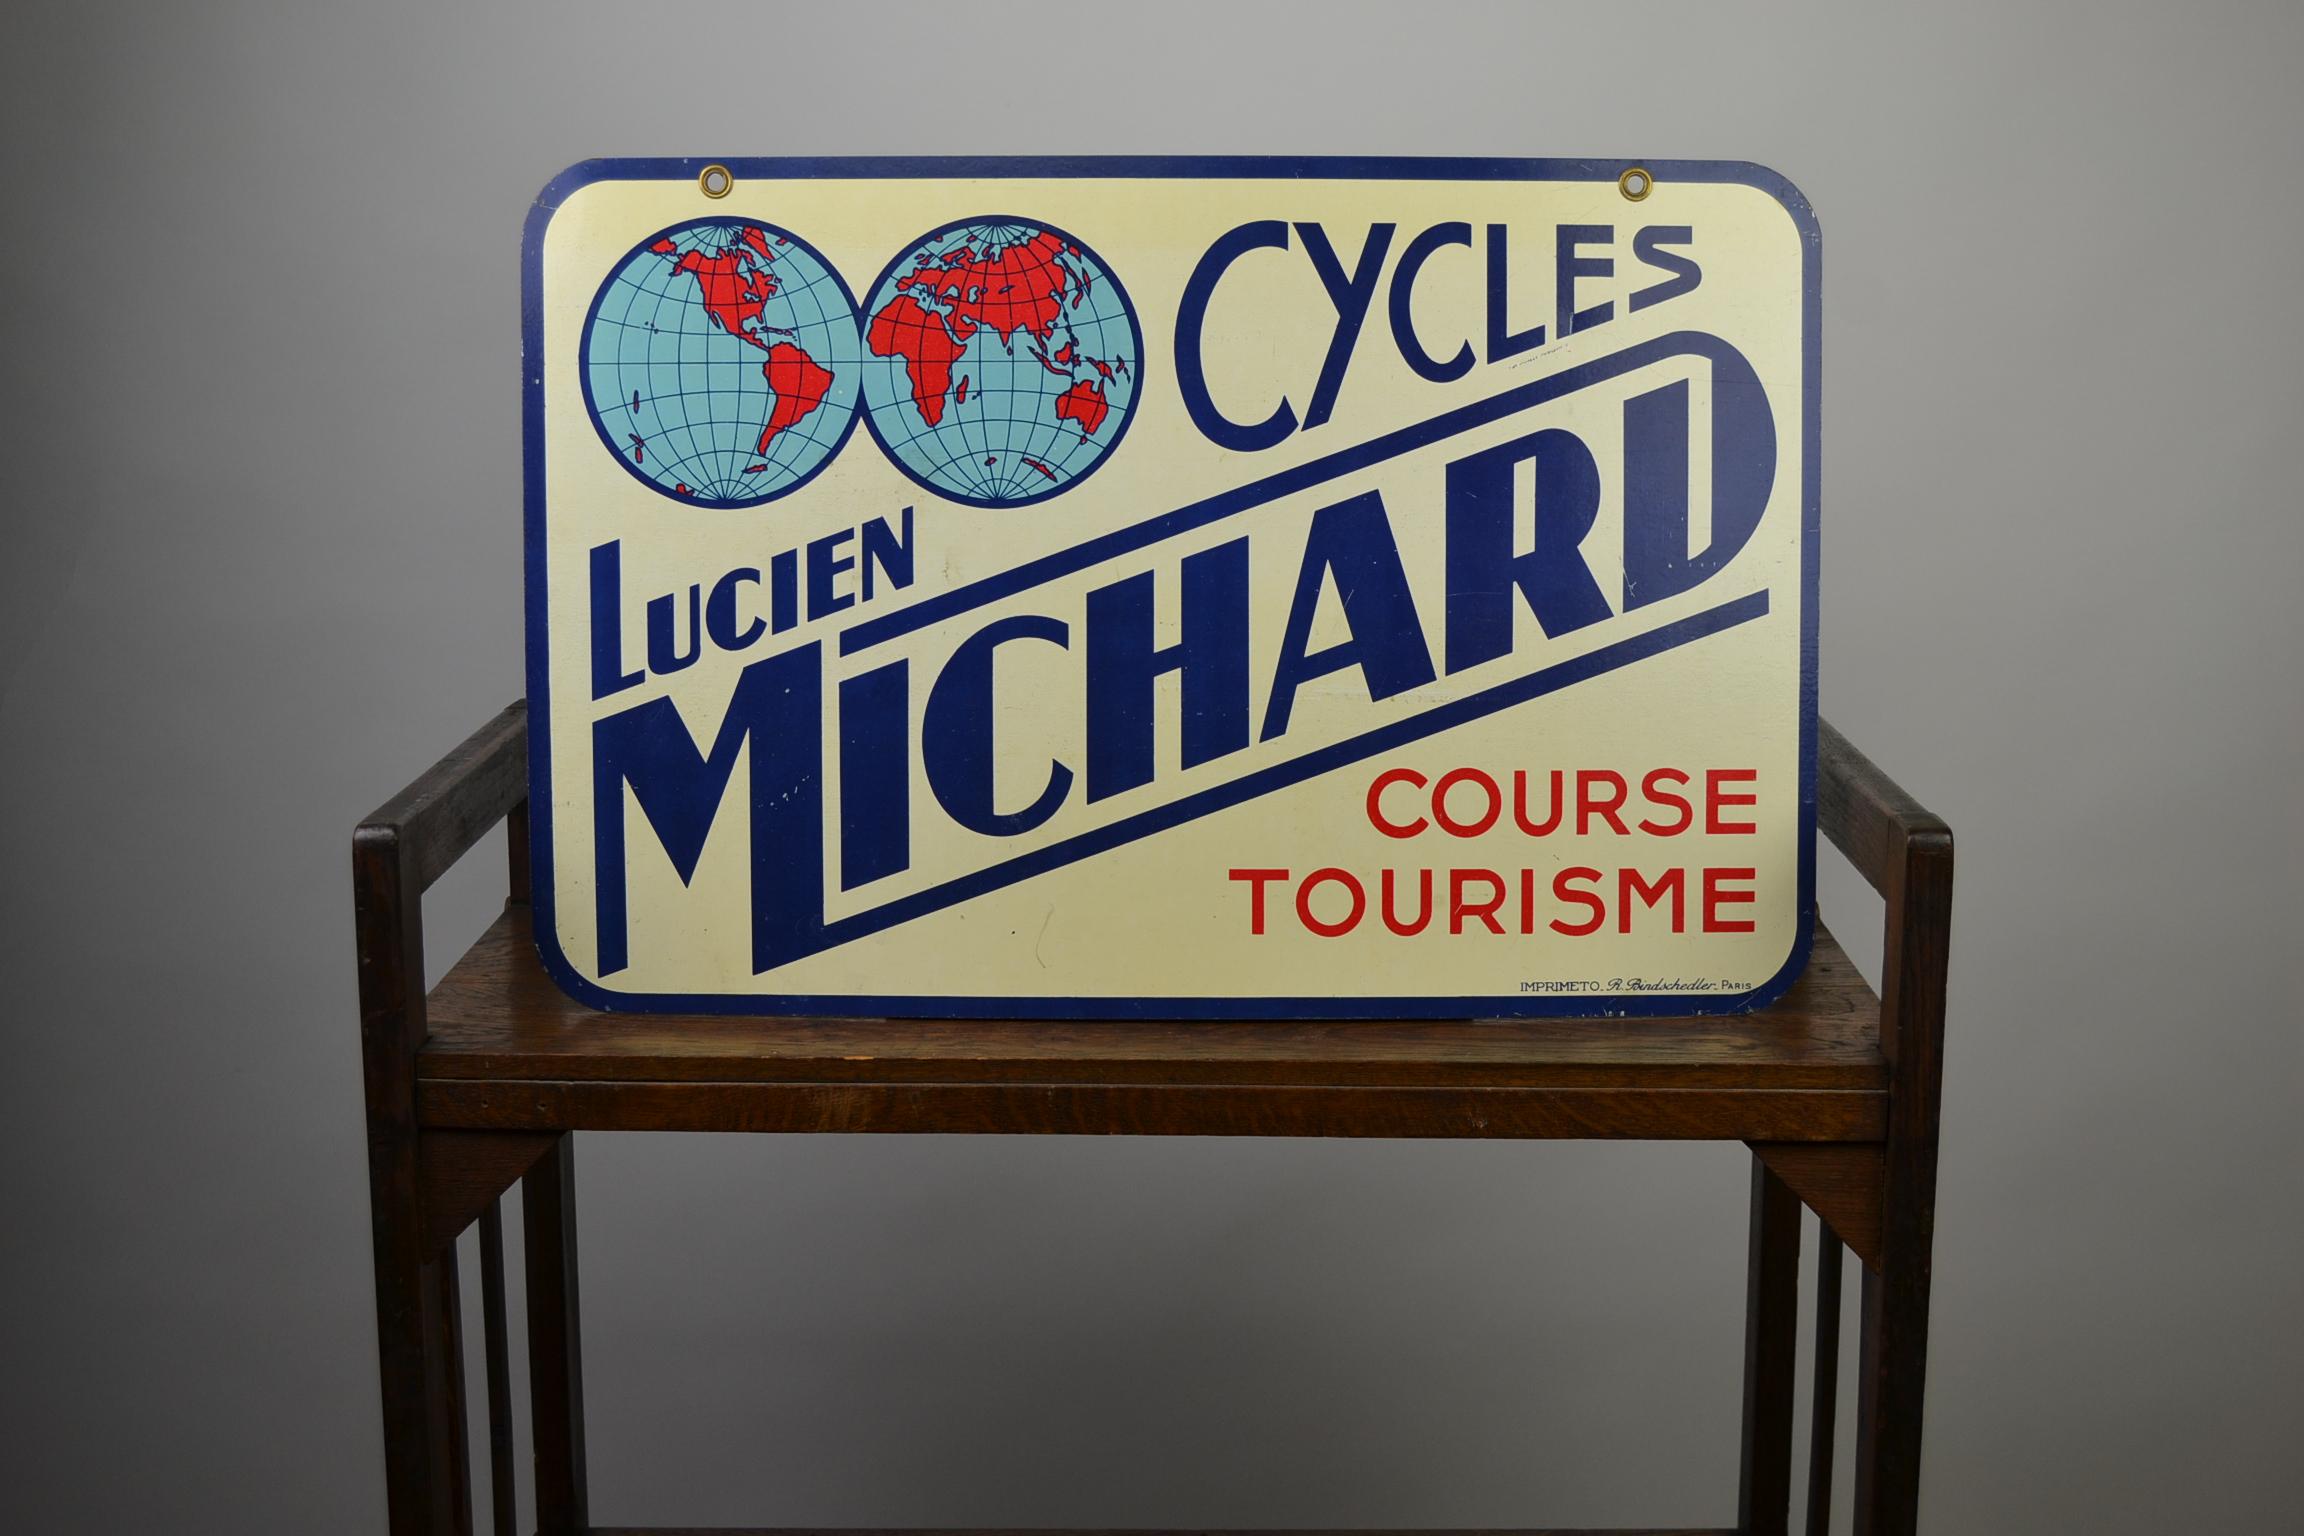 Sporting Art Double-Sided Metal Trade Sign for Cycles Lucien Michard, France, 1950s